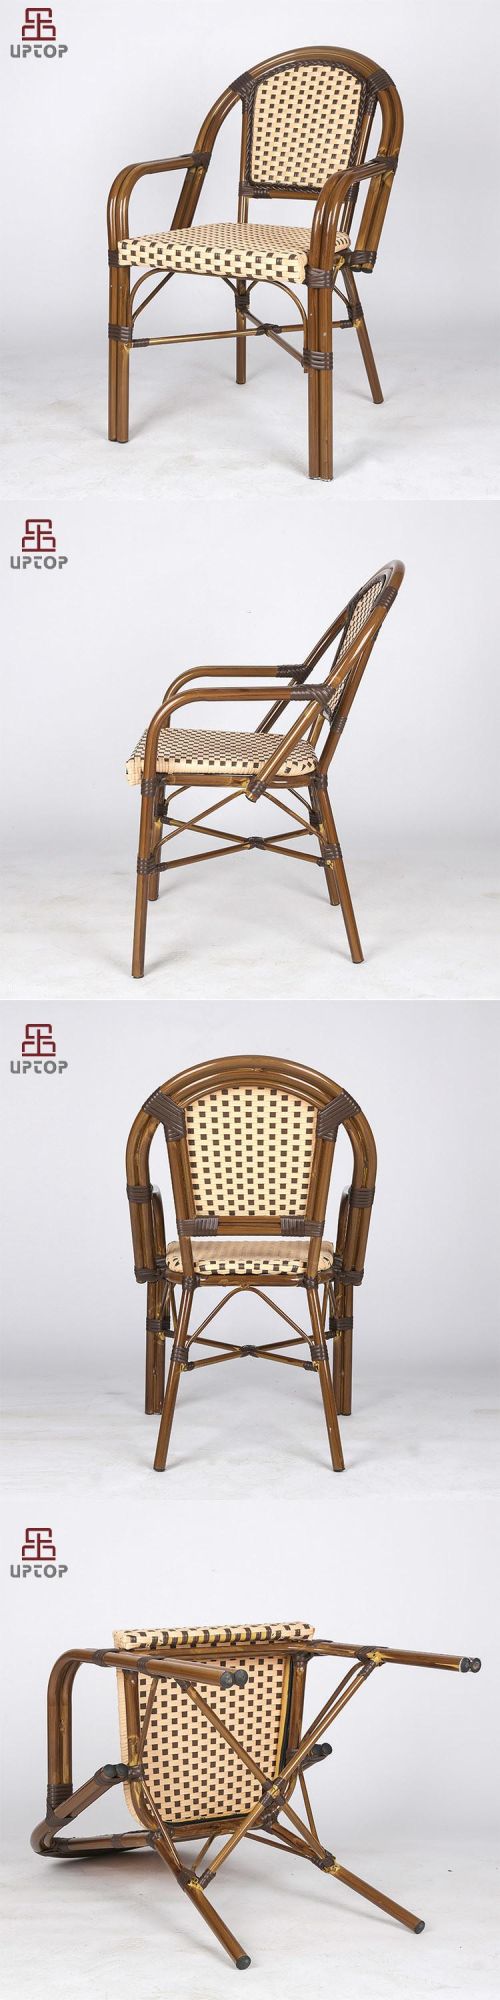 (SP-OC426) Wholesale Hot Sale Aluminum Frame with PE Rattan Outdoor Dining Chair